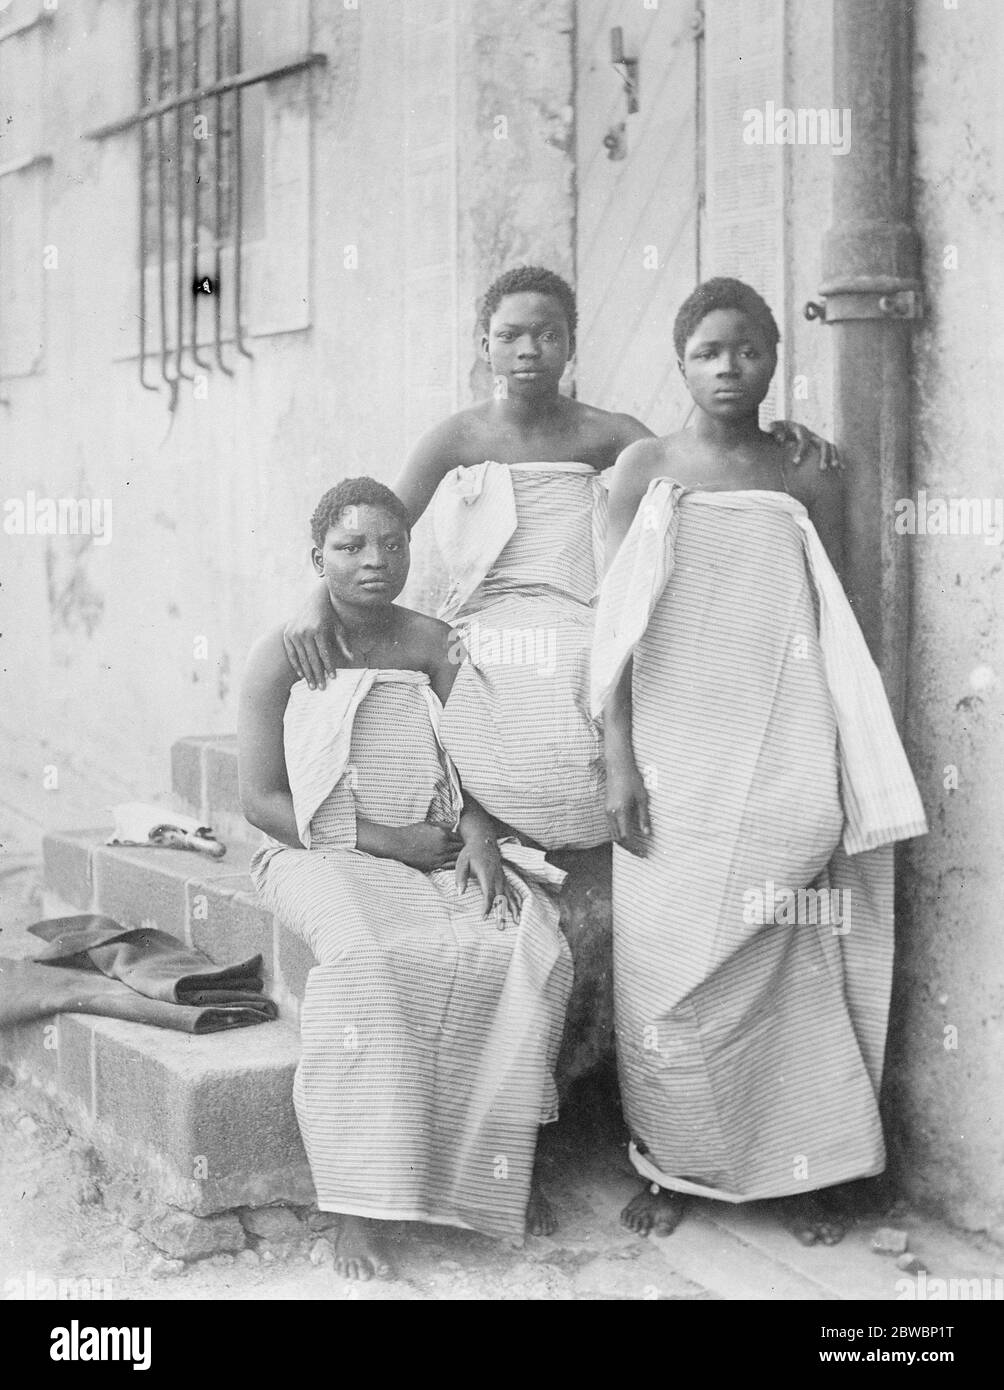 Daughters of a Notorious King Who Are Going on Stage The three Princesses of Dahomey , whose father King Behanzin was seized by the French in 1900 and exiled to the Congo , as a result of the Hecatombs of human victims   25 November 1922 Stock Photo